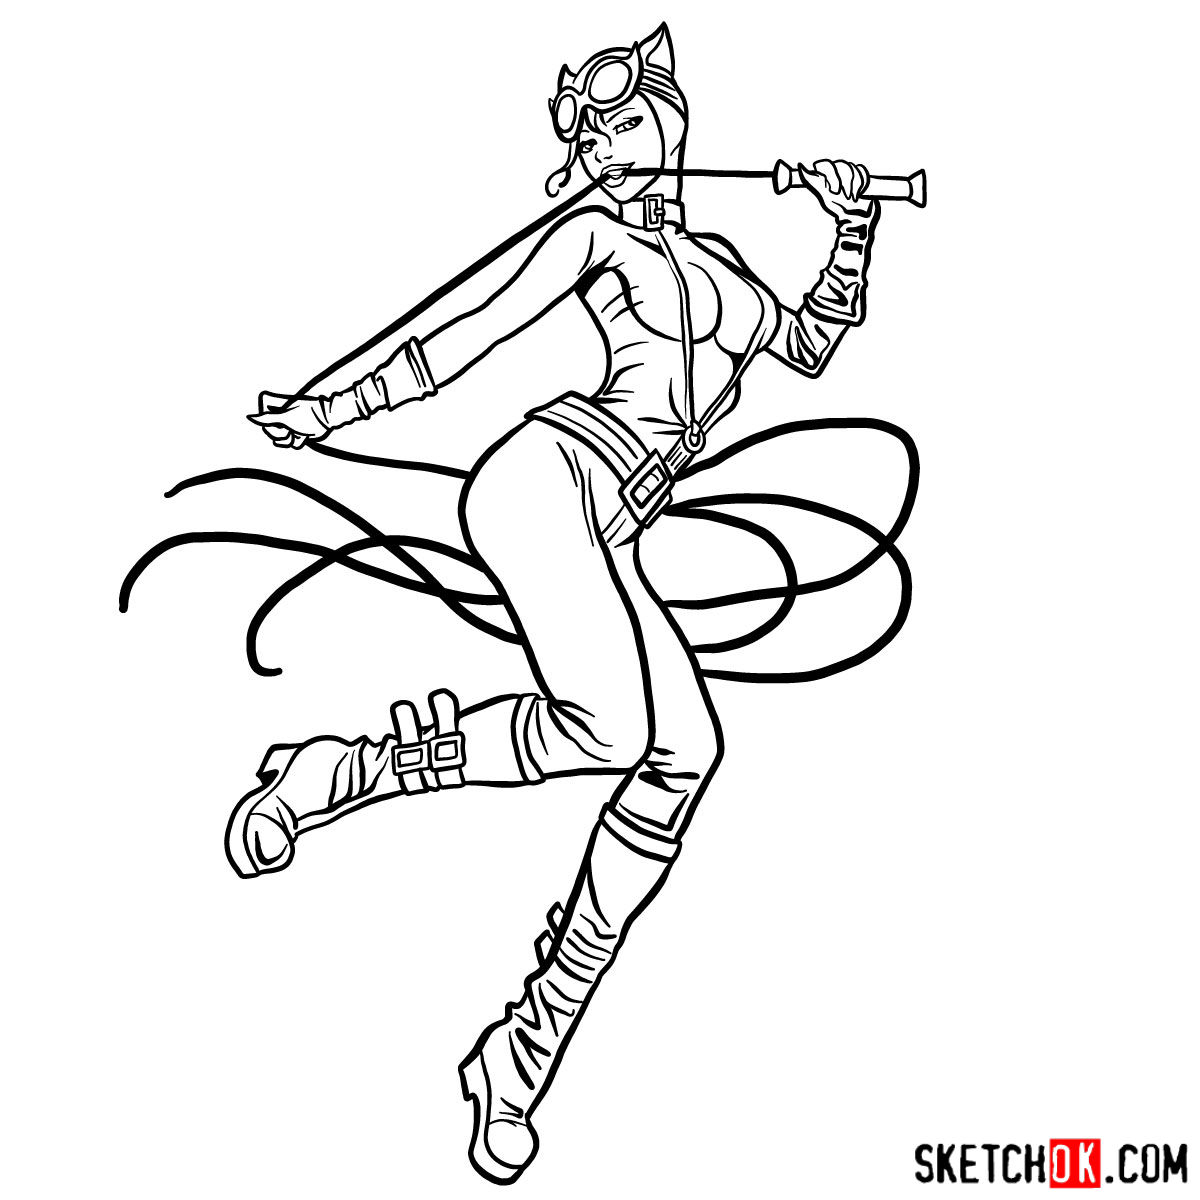 How to draw Catwoman superheroine from DC Comics - step 18